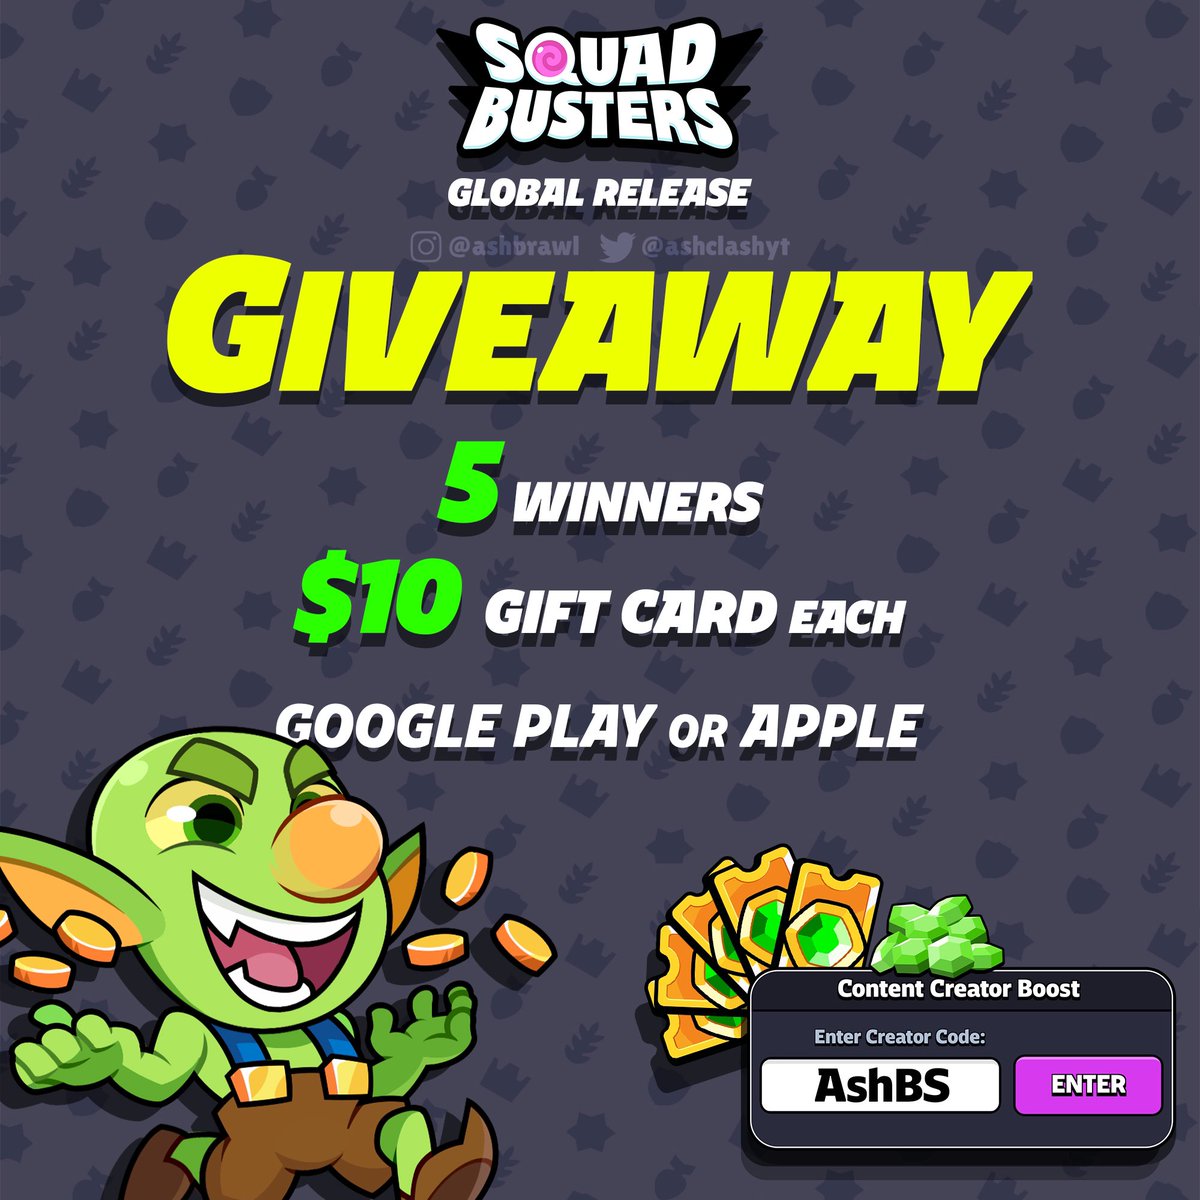 GIVEAWAY TIME! 🥳

To celebrate Squad Busters global release, I’m giving away a $10 Apple or Google Play gift codes to 5 winners! 

To enter:

❤️ Like and Follow me @AshClashYT 
❤️ Use code AshBS in the Squad Busters Shop! 

That’s it! Winners will be announced in three days!